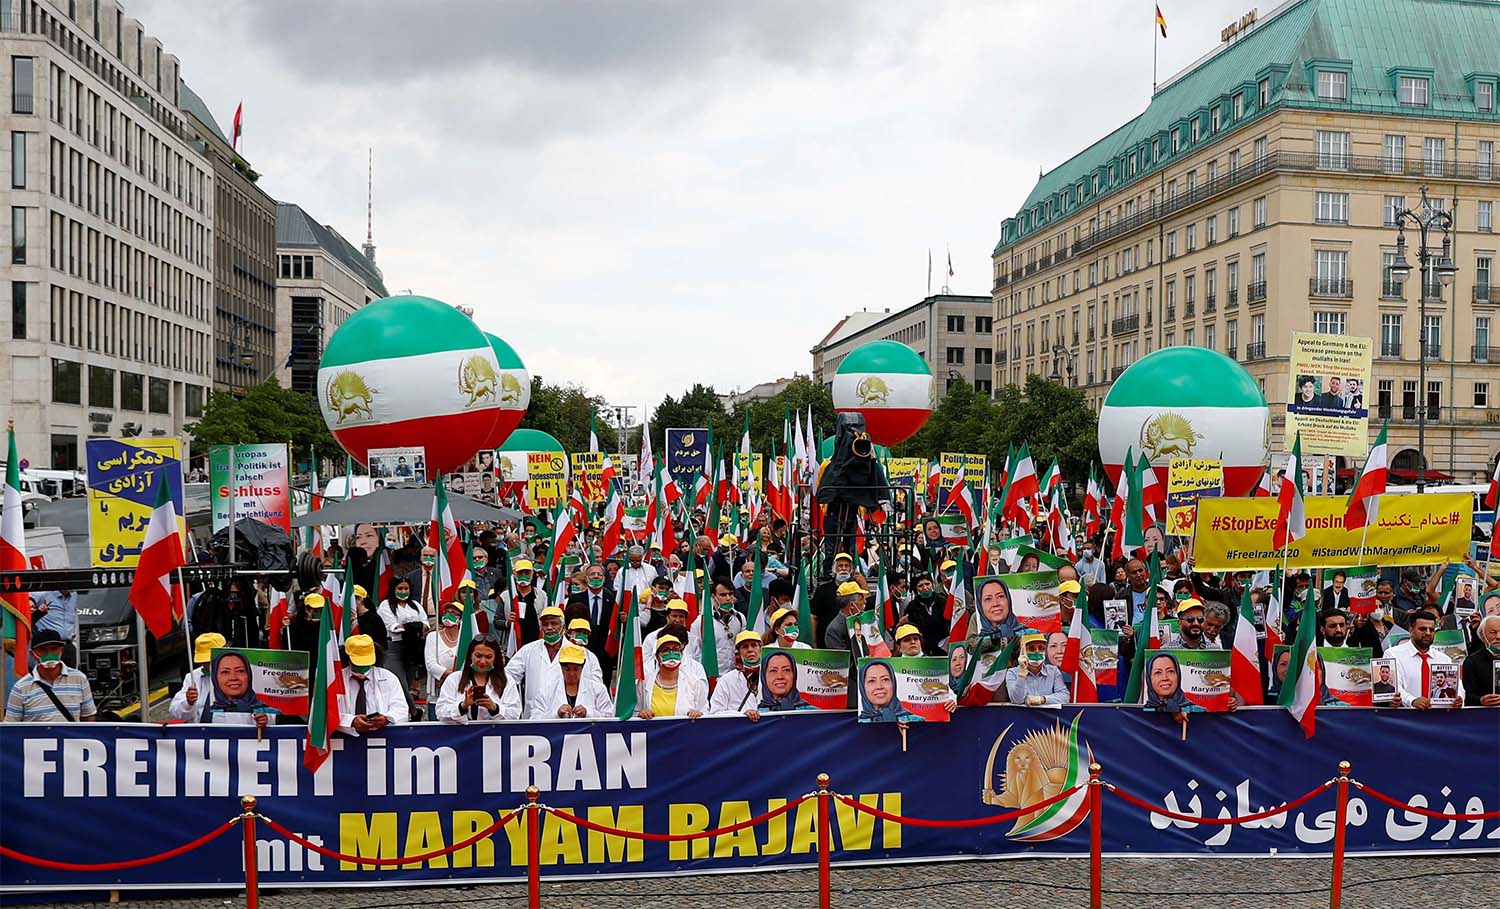 Supporters of Iranian opposition leader Maryam Rajavi and the National Council of Resistance of Iran (NCRI) gather to protest against the death penalty in Iran